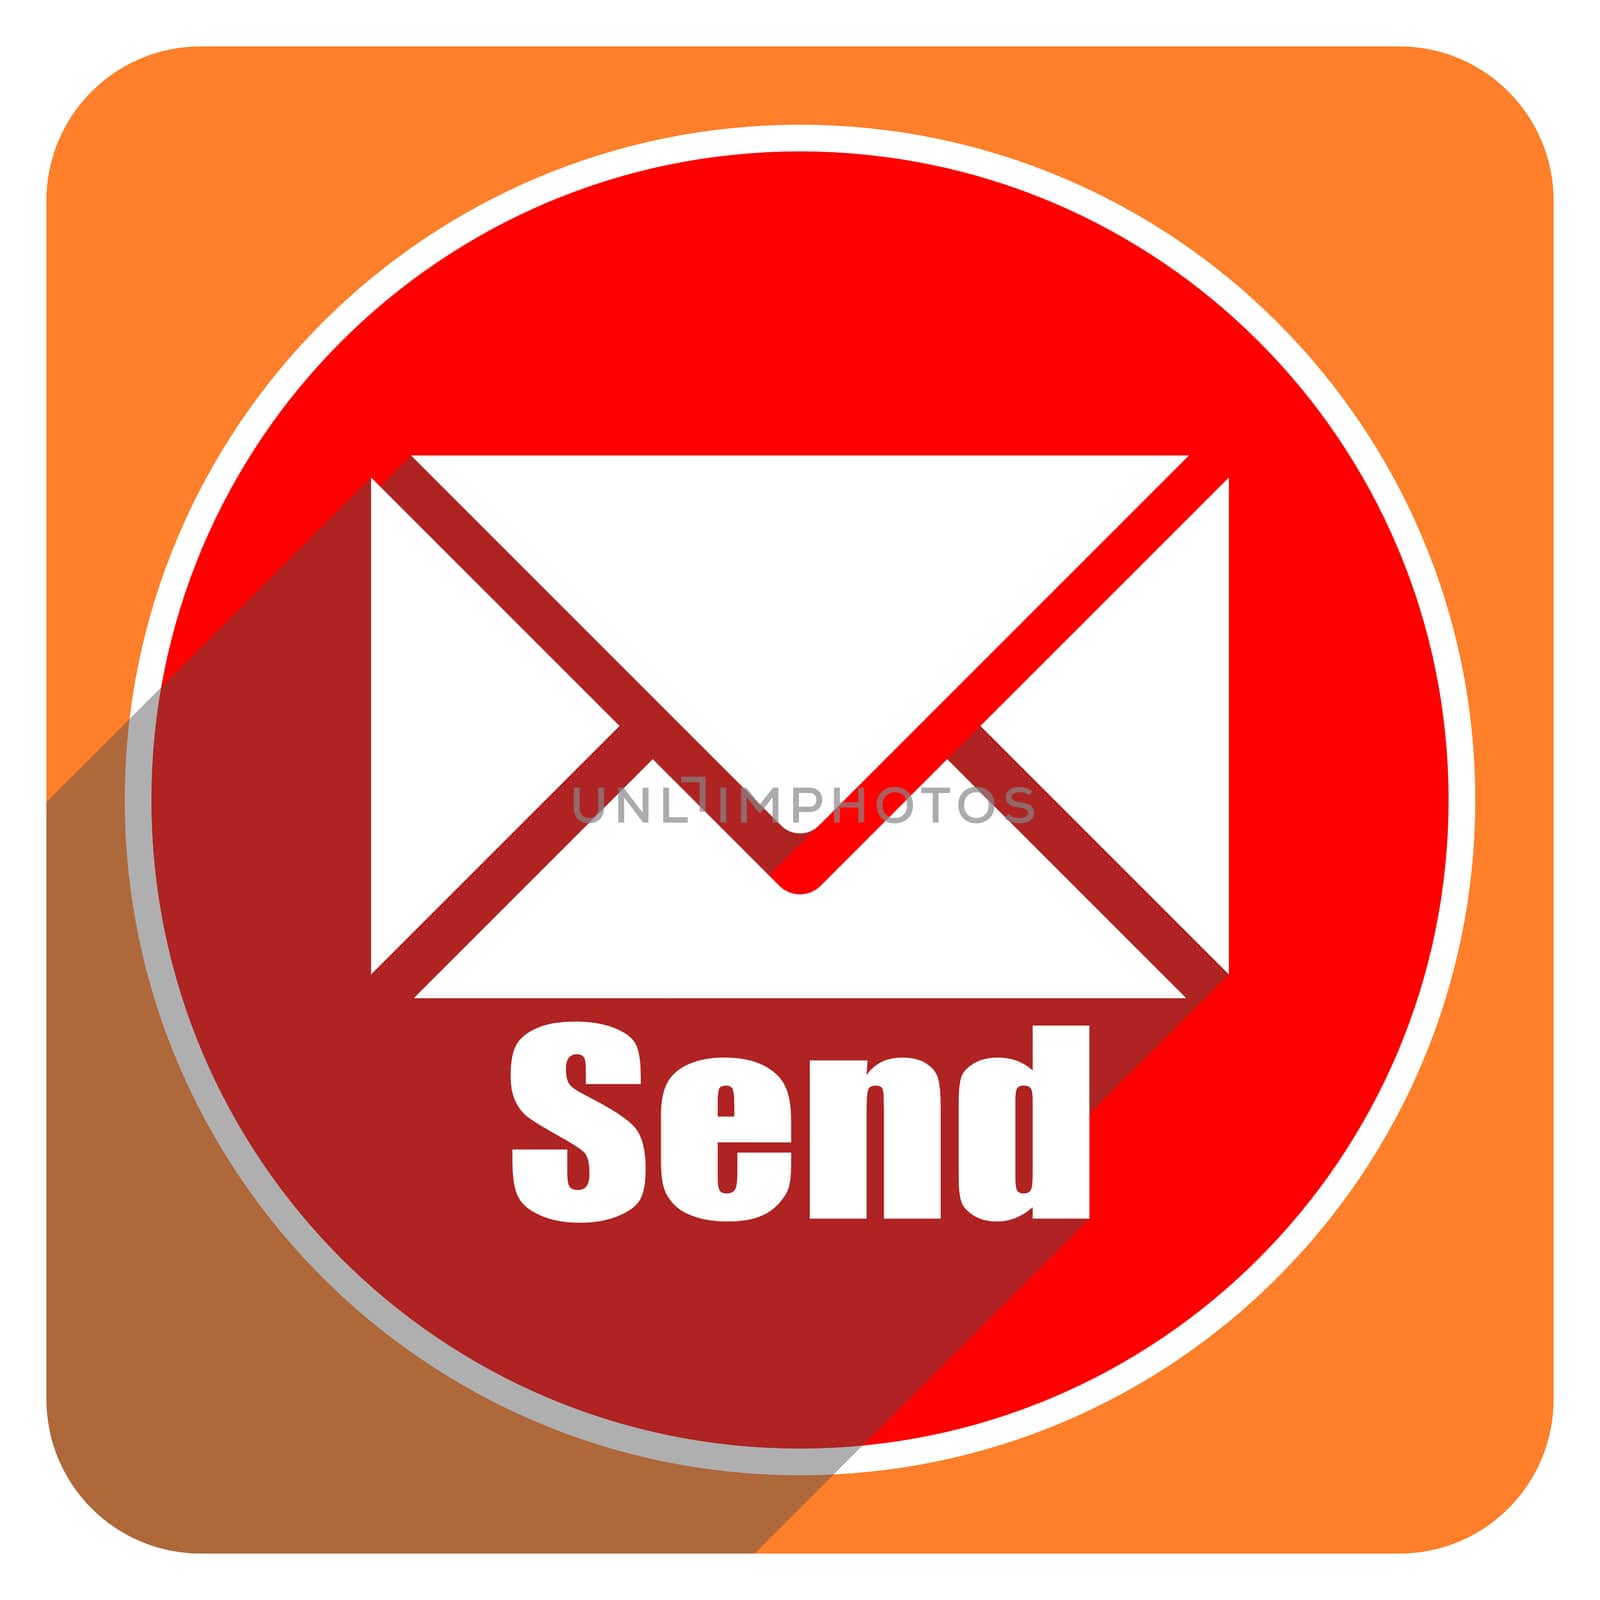 send red flat icon isolated by alexwhite